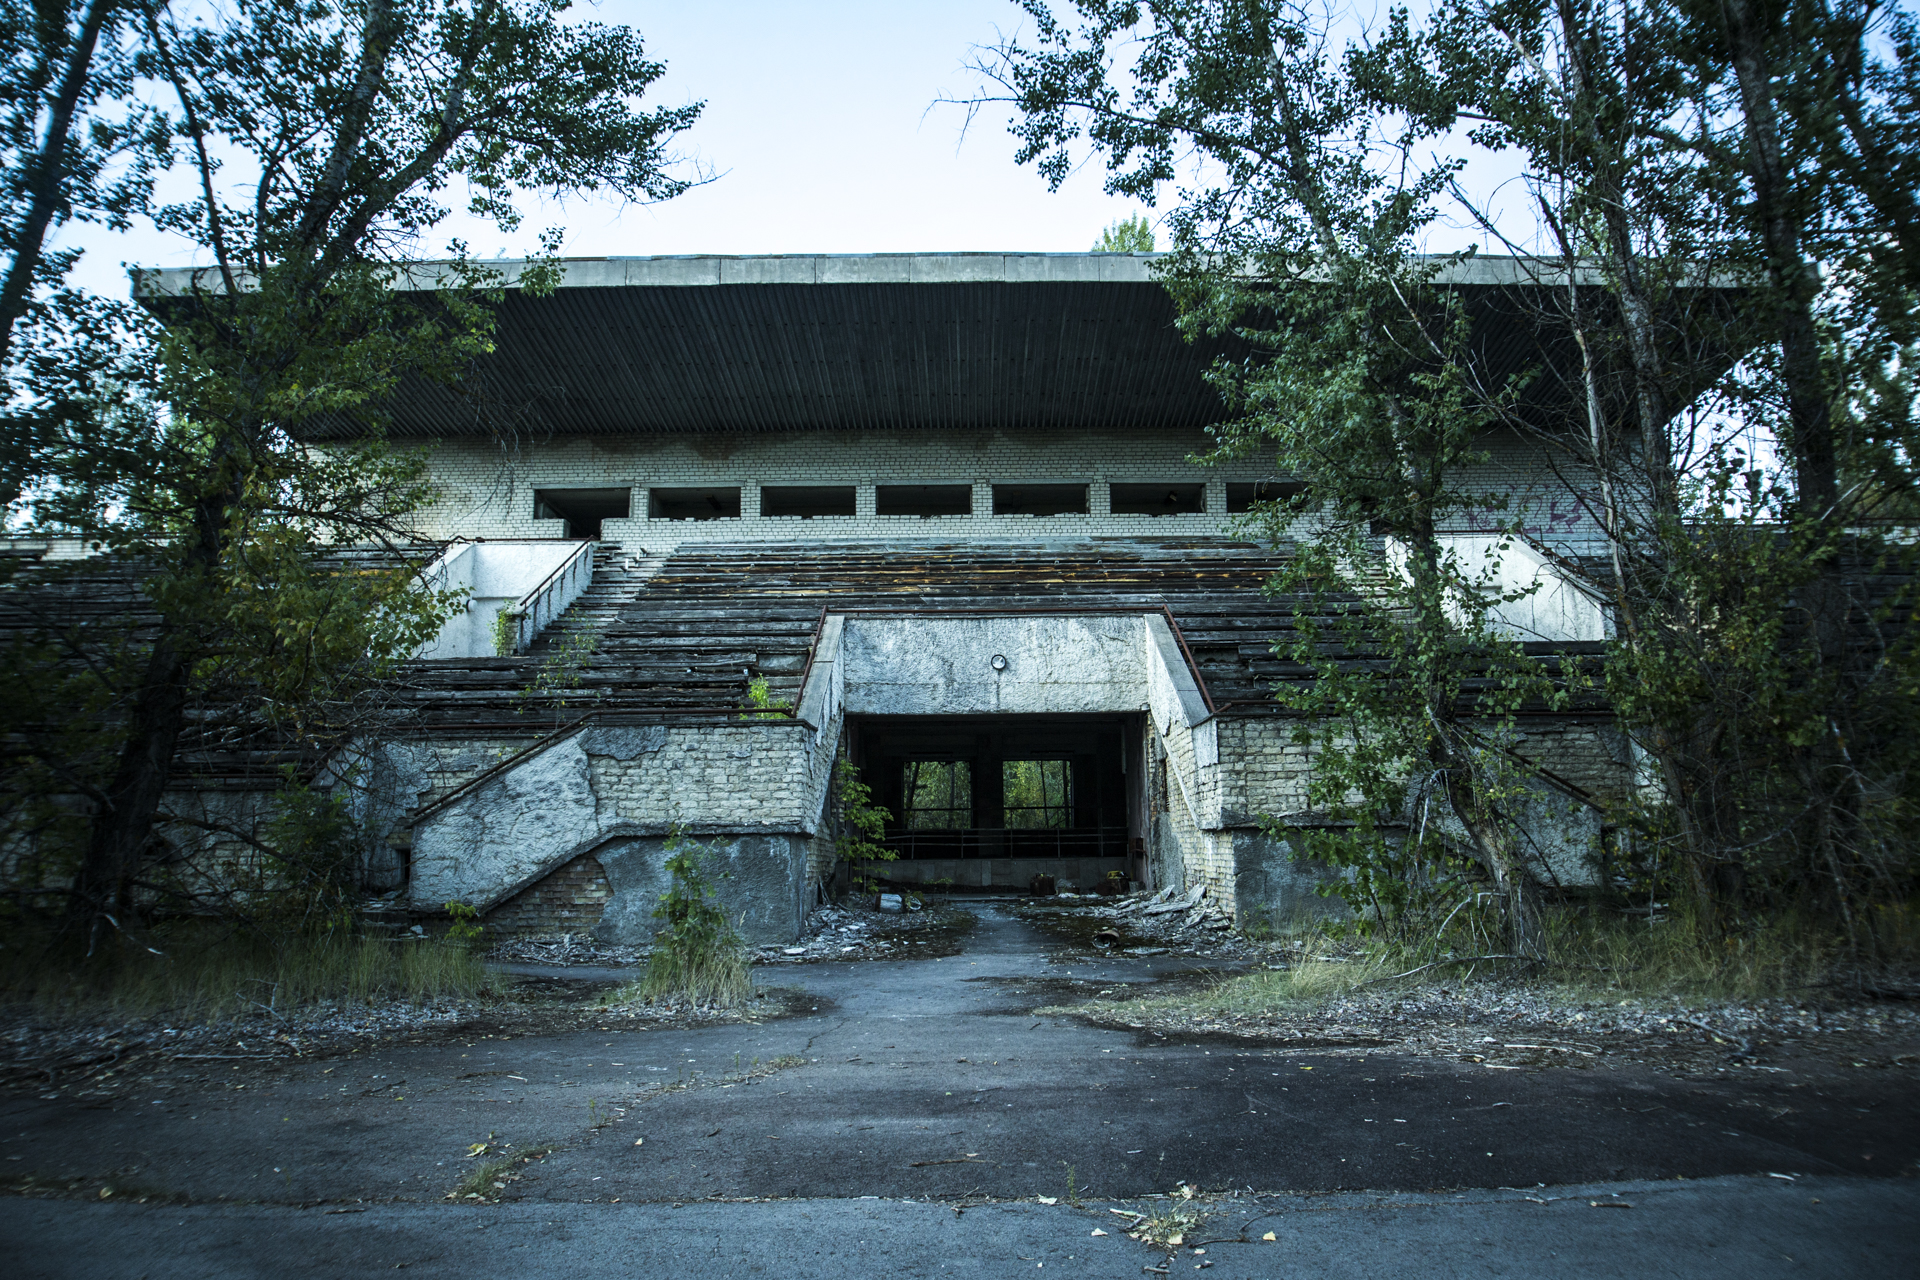  The stadium in Pripyat was one of several attractions that never reached completion before disaster struck. 